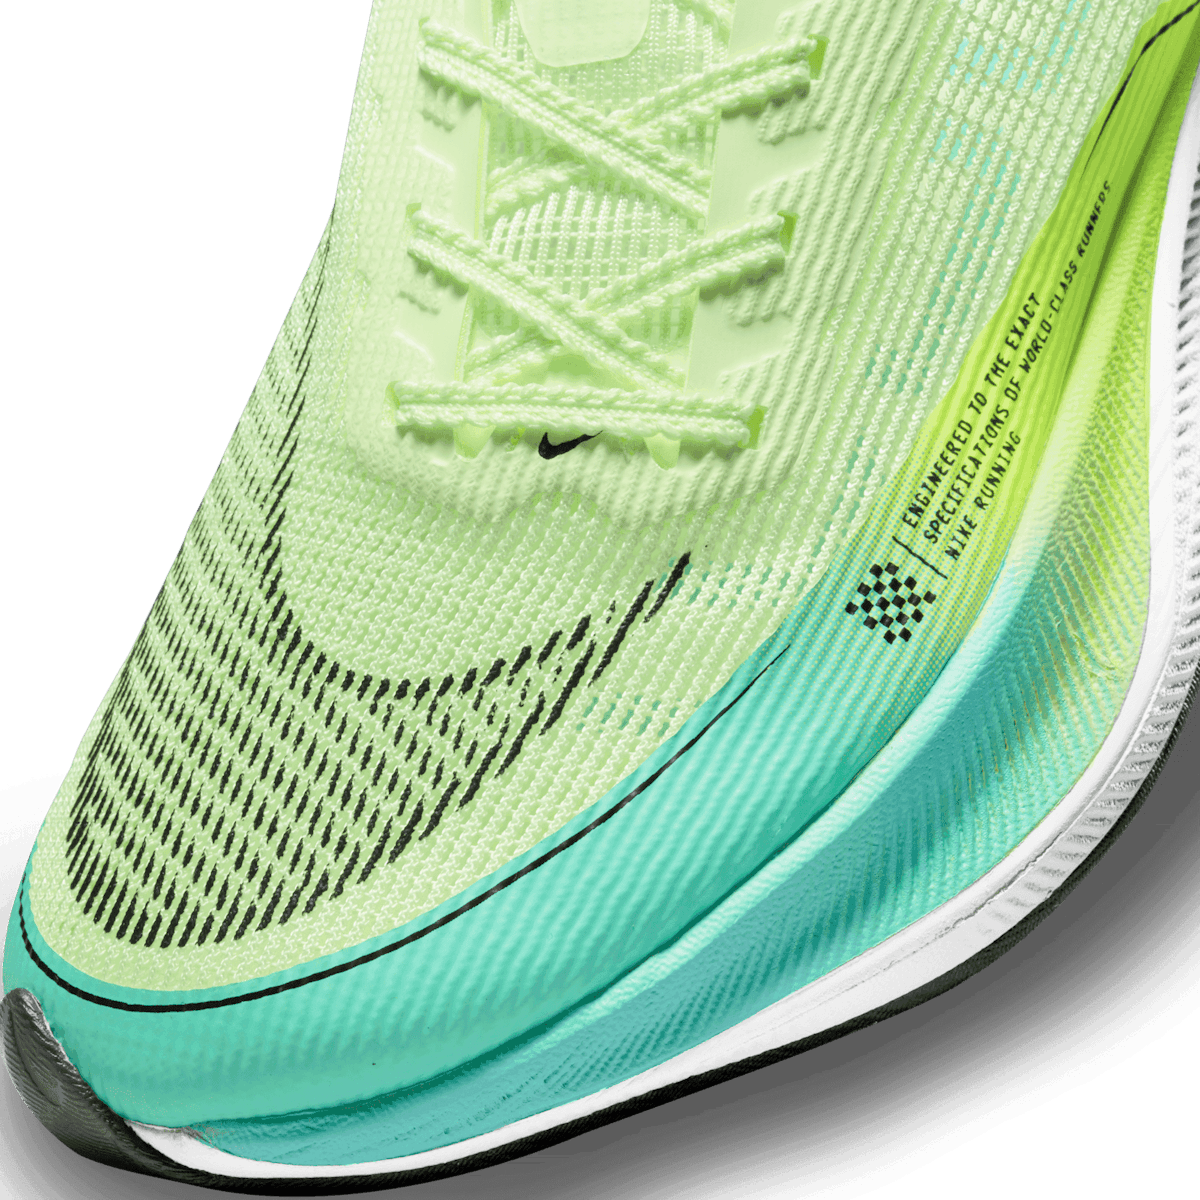 Nike ZoomX Vaporfly Next% 2 Barely Volt Turquoise (W) - CU4123-700 ...